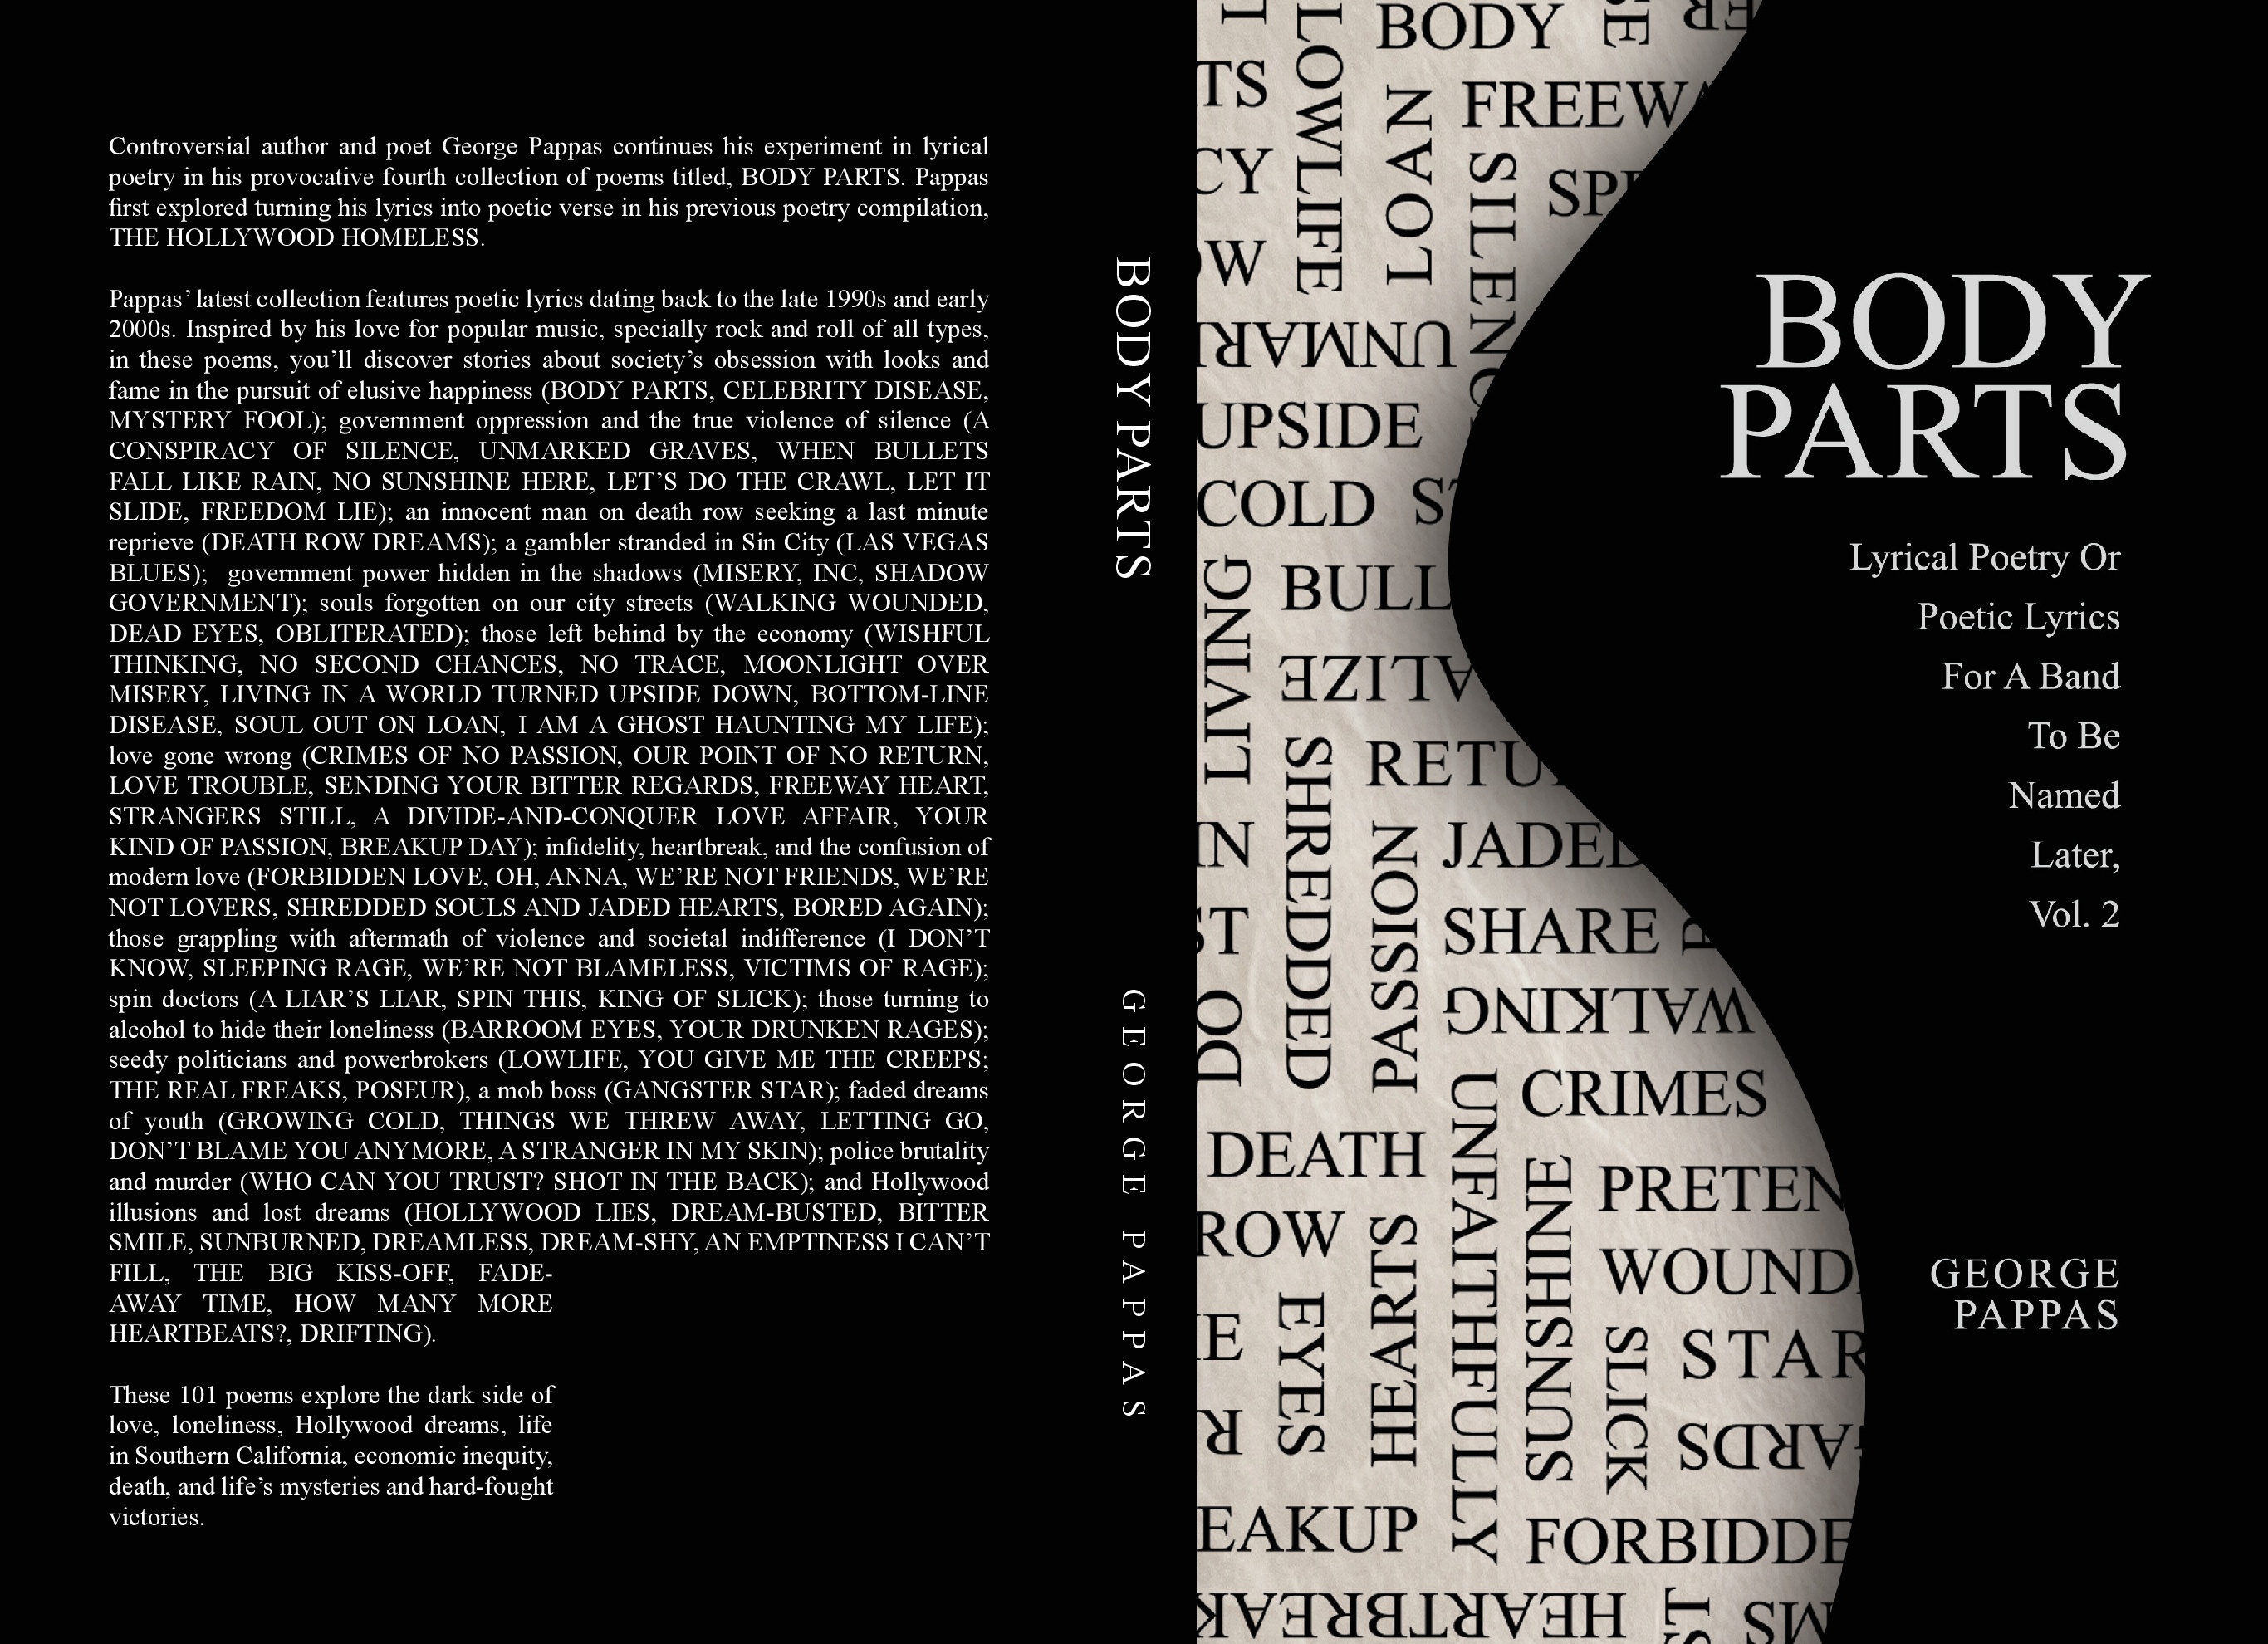 BODY PARTS FINAL PRINT COVER-REVISED JPG